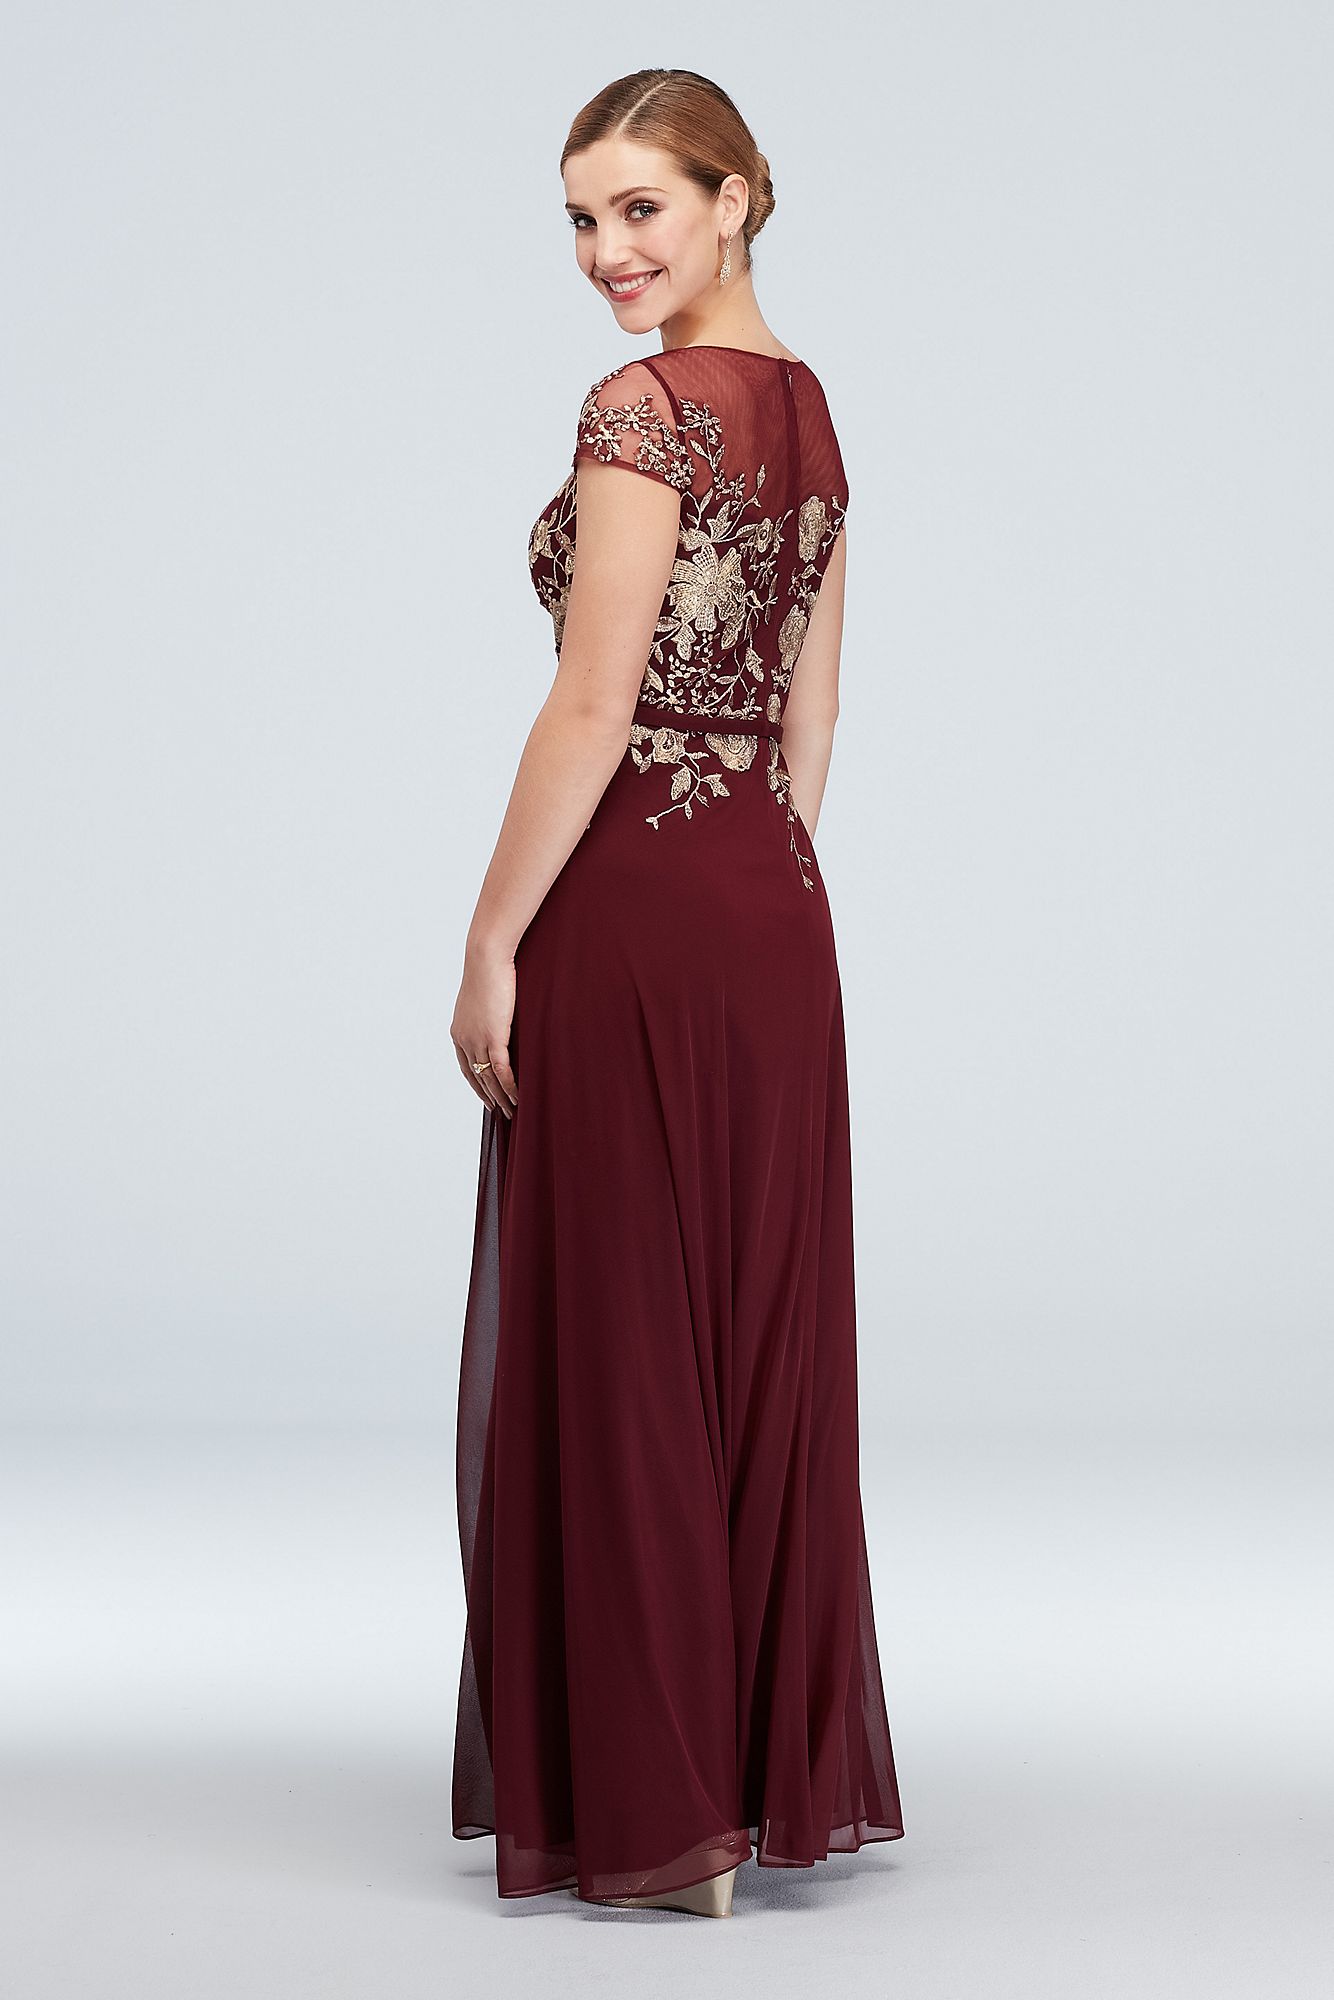 Metallic Floral Illusion Cap Sleeve Gown and Shawl 60314D